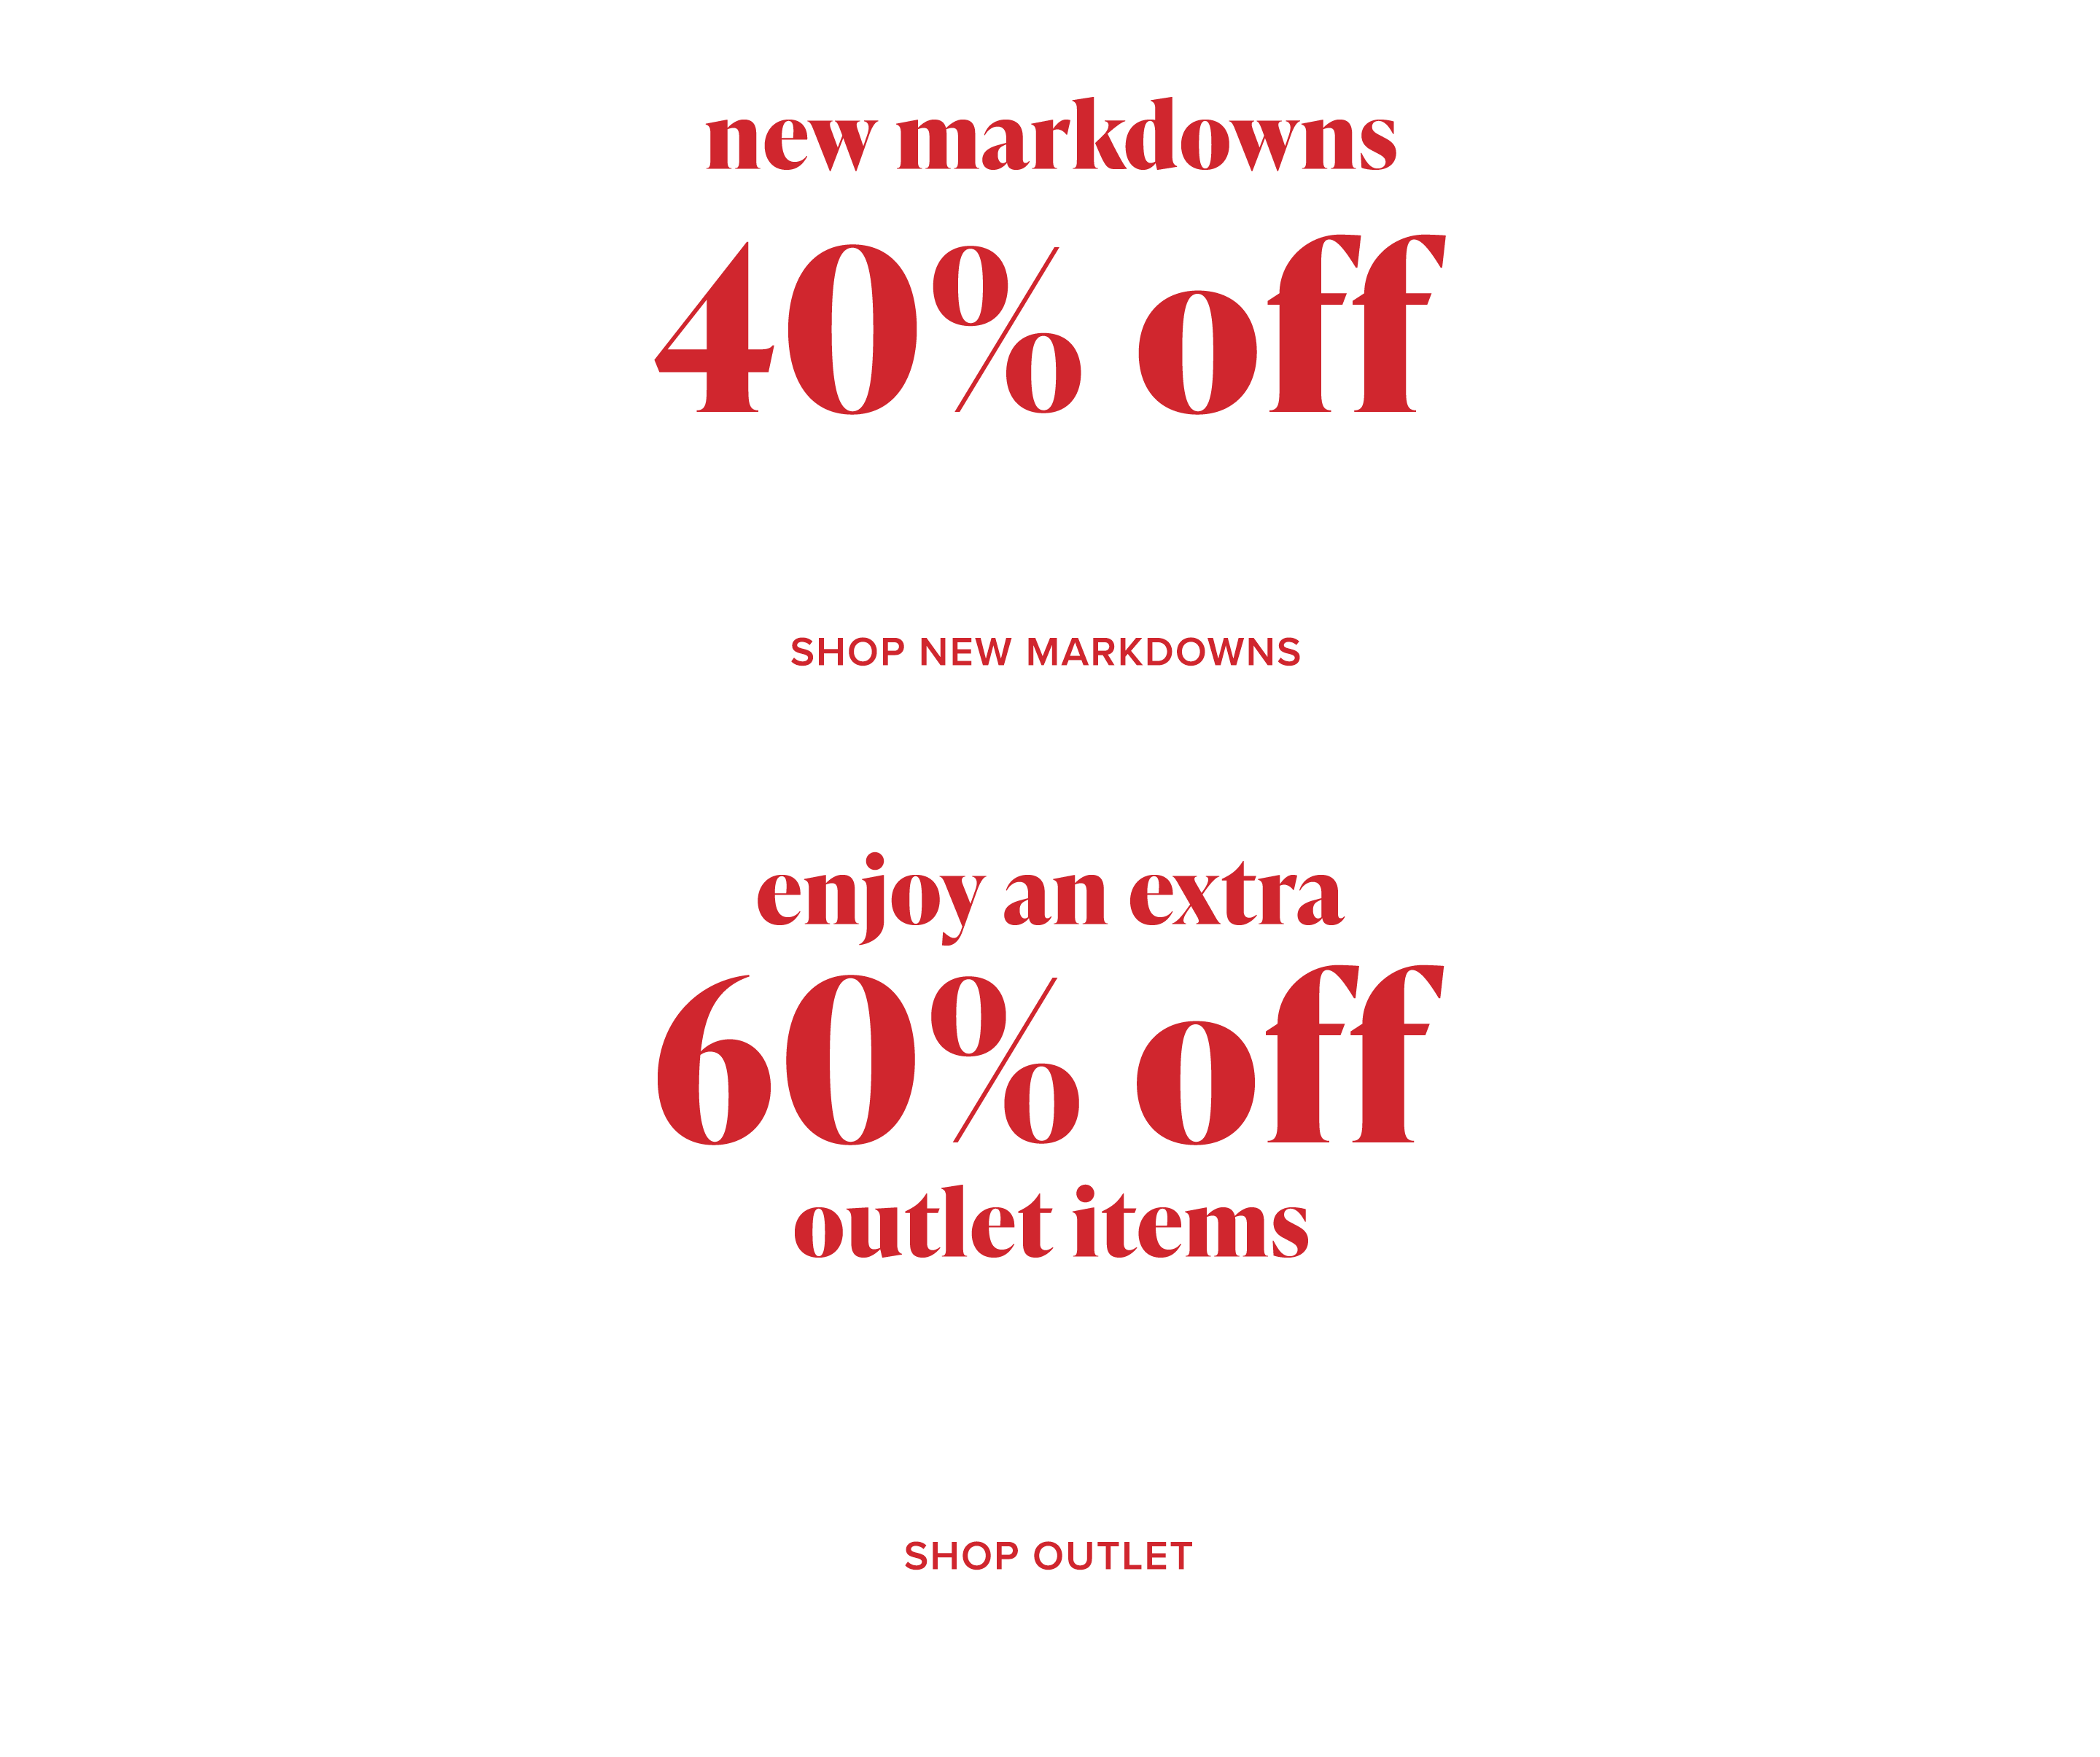 New Markdowns Up to 45% Off and an Extra 60% Off Outlet